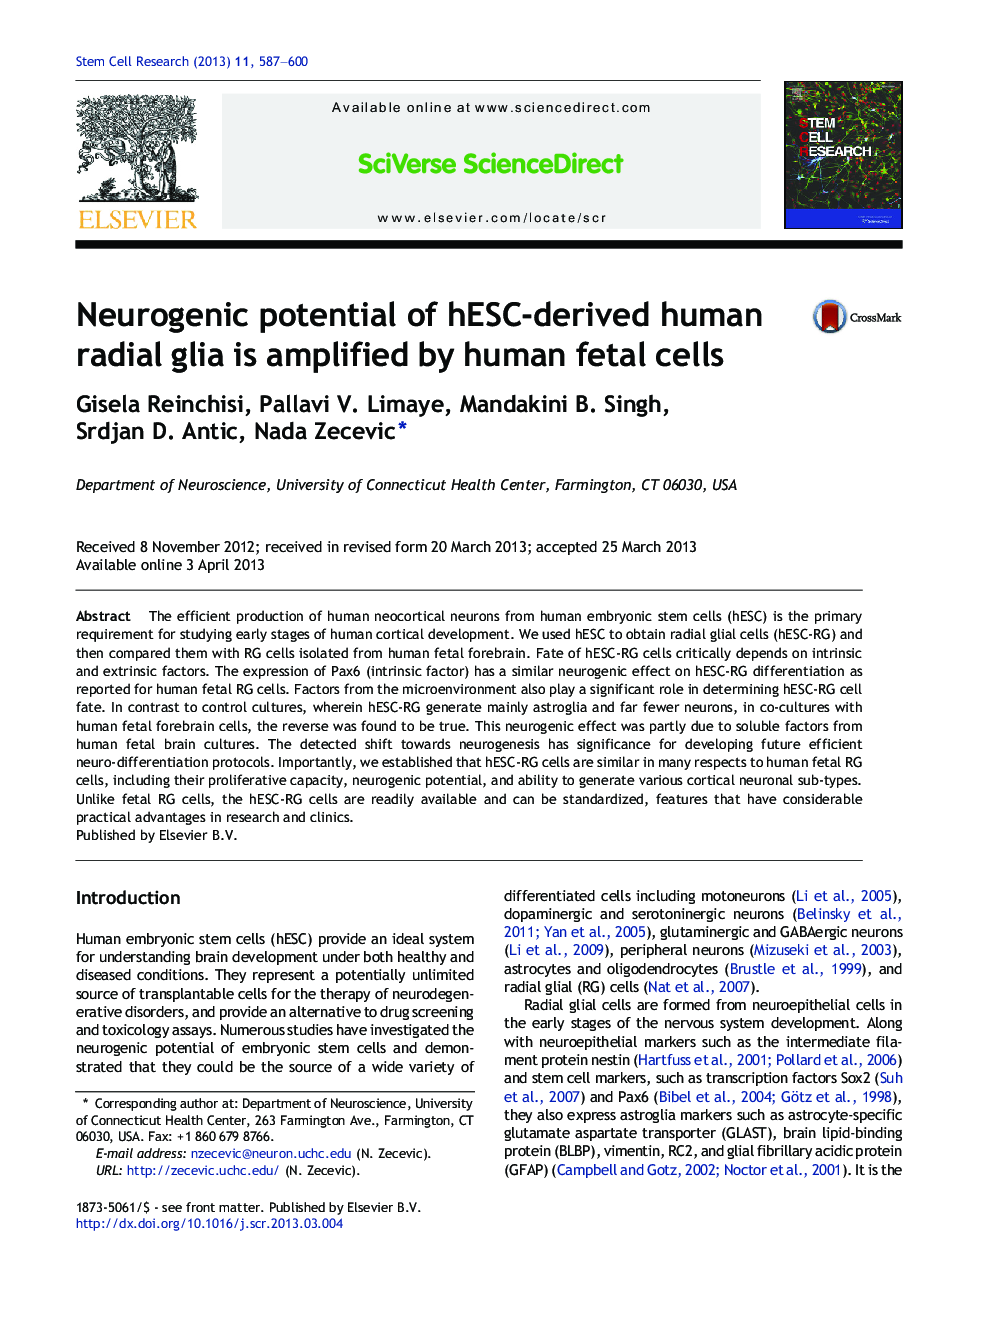 Neurogenic potential of hESC-derived human radial glia is amplified by human fetal cells